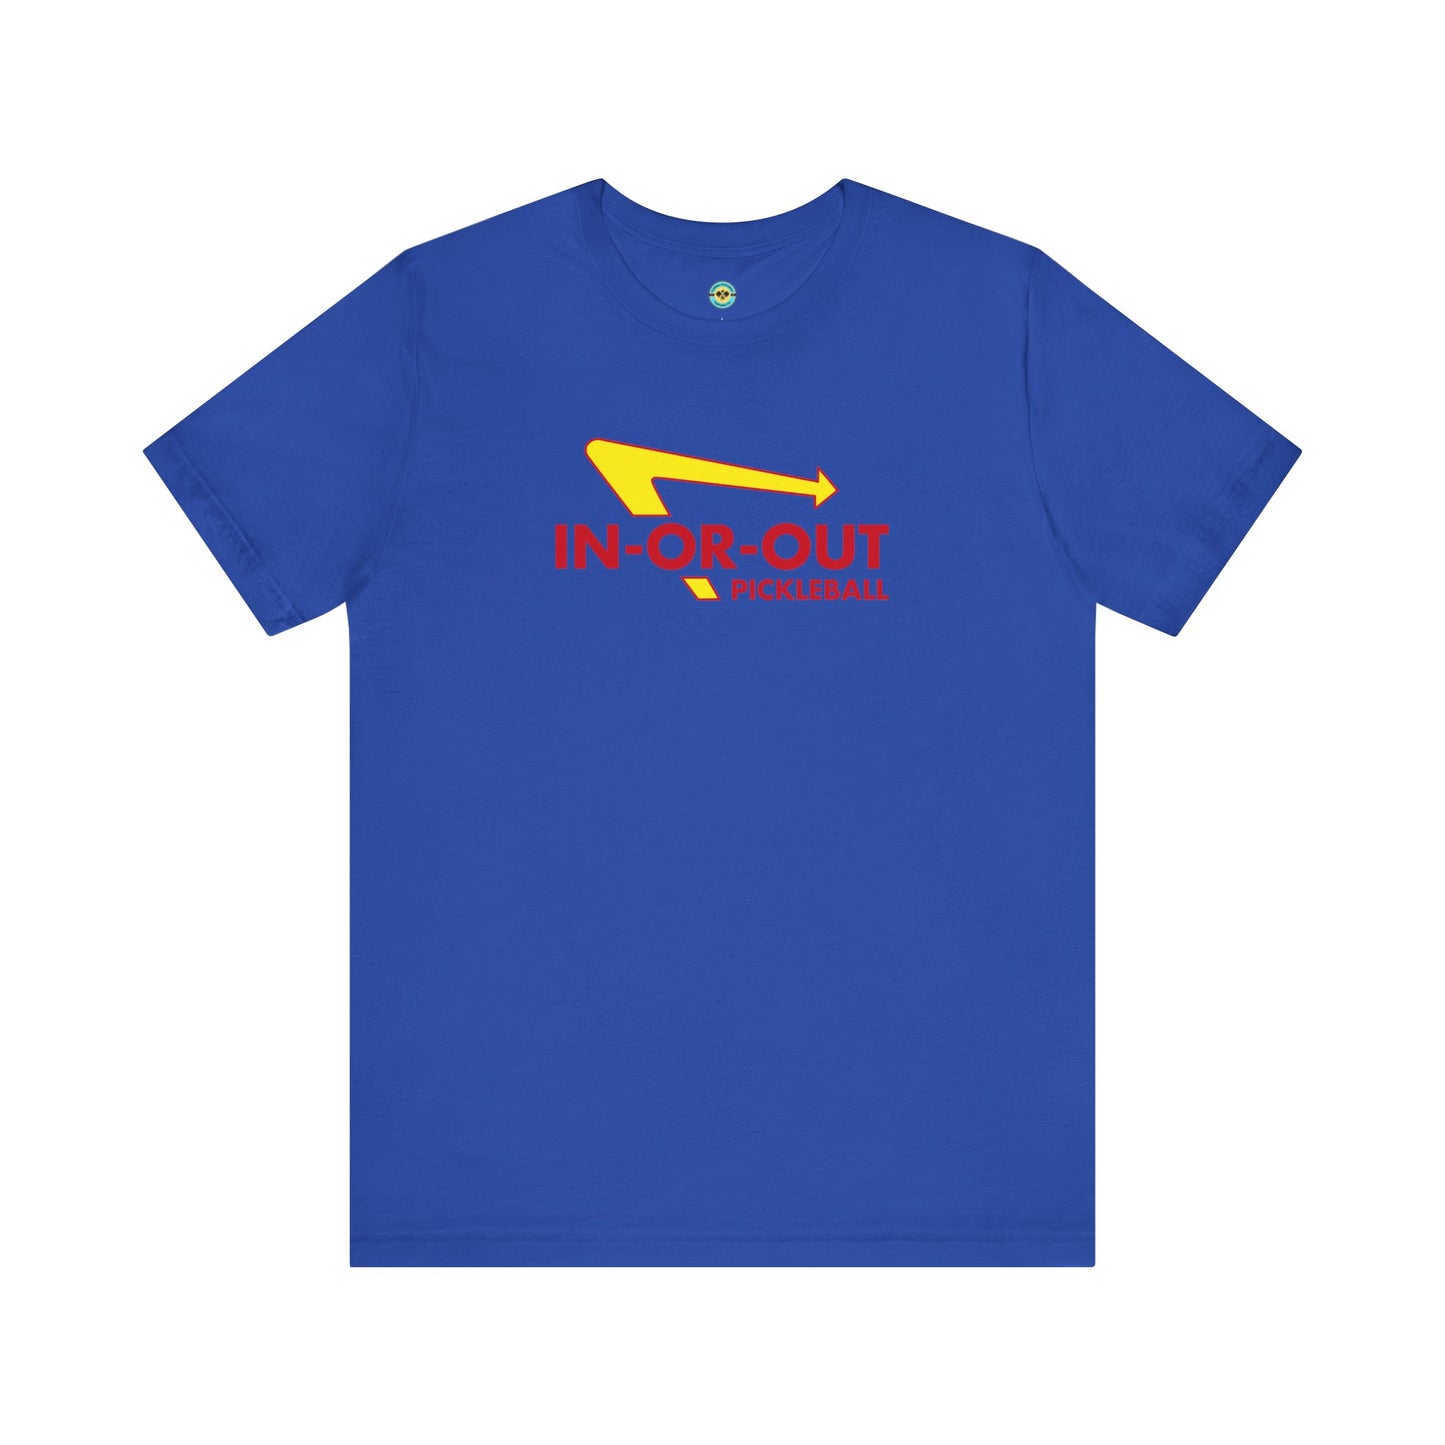 In-Or-Out Pickleball Unisex Tee